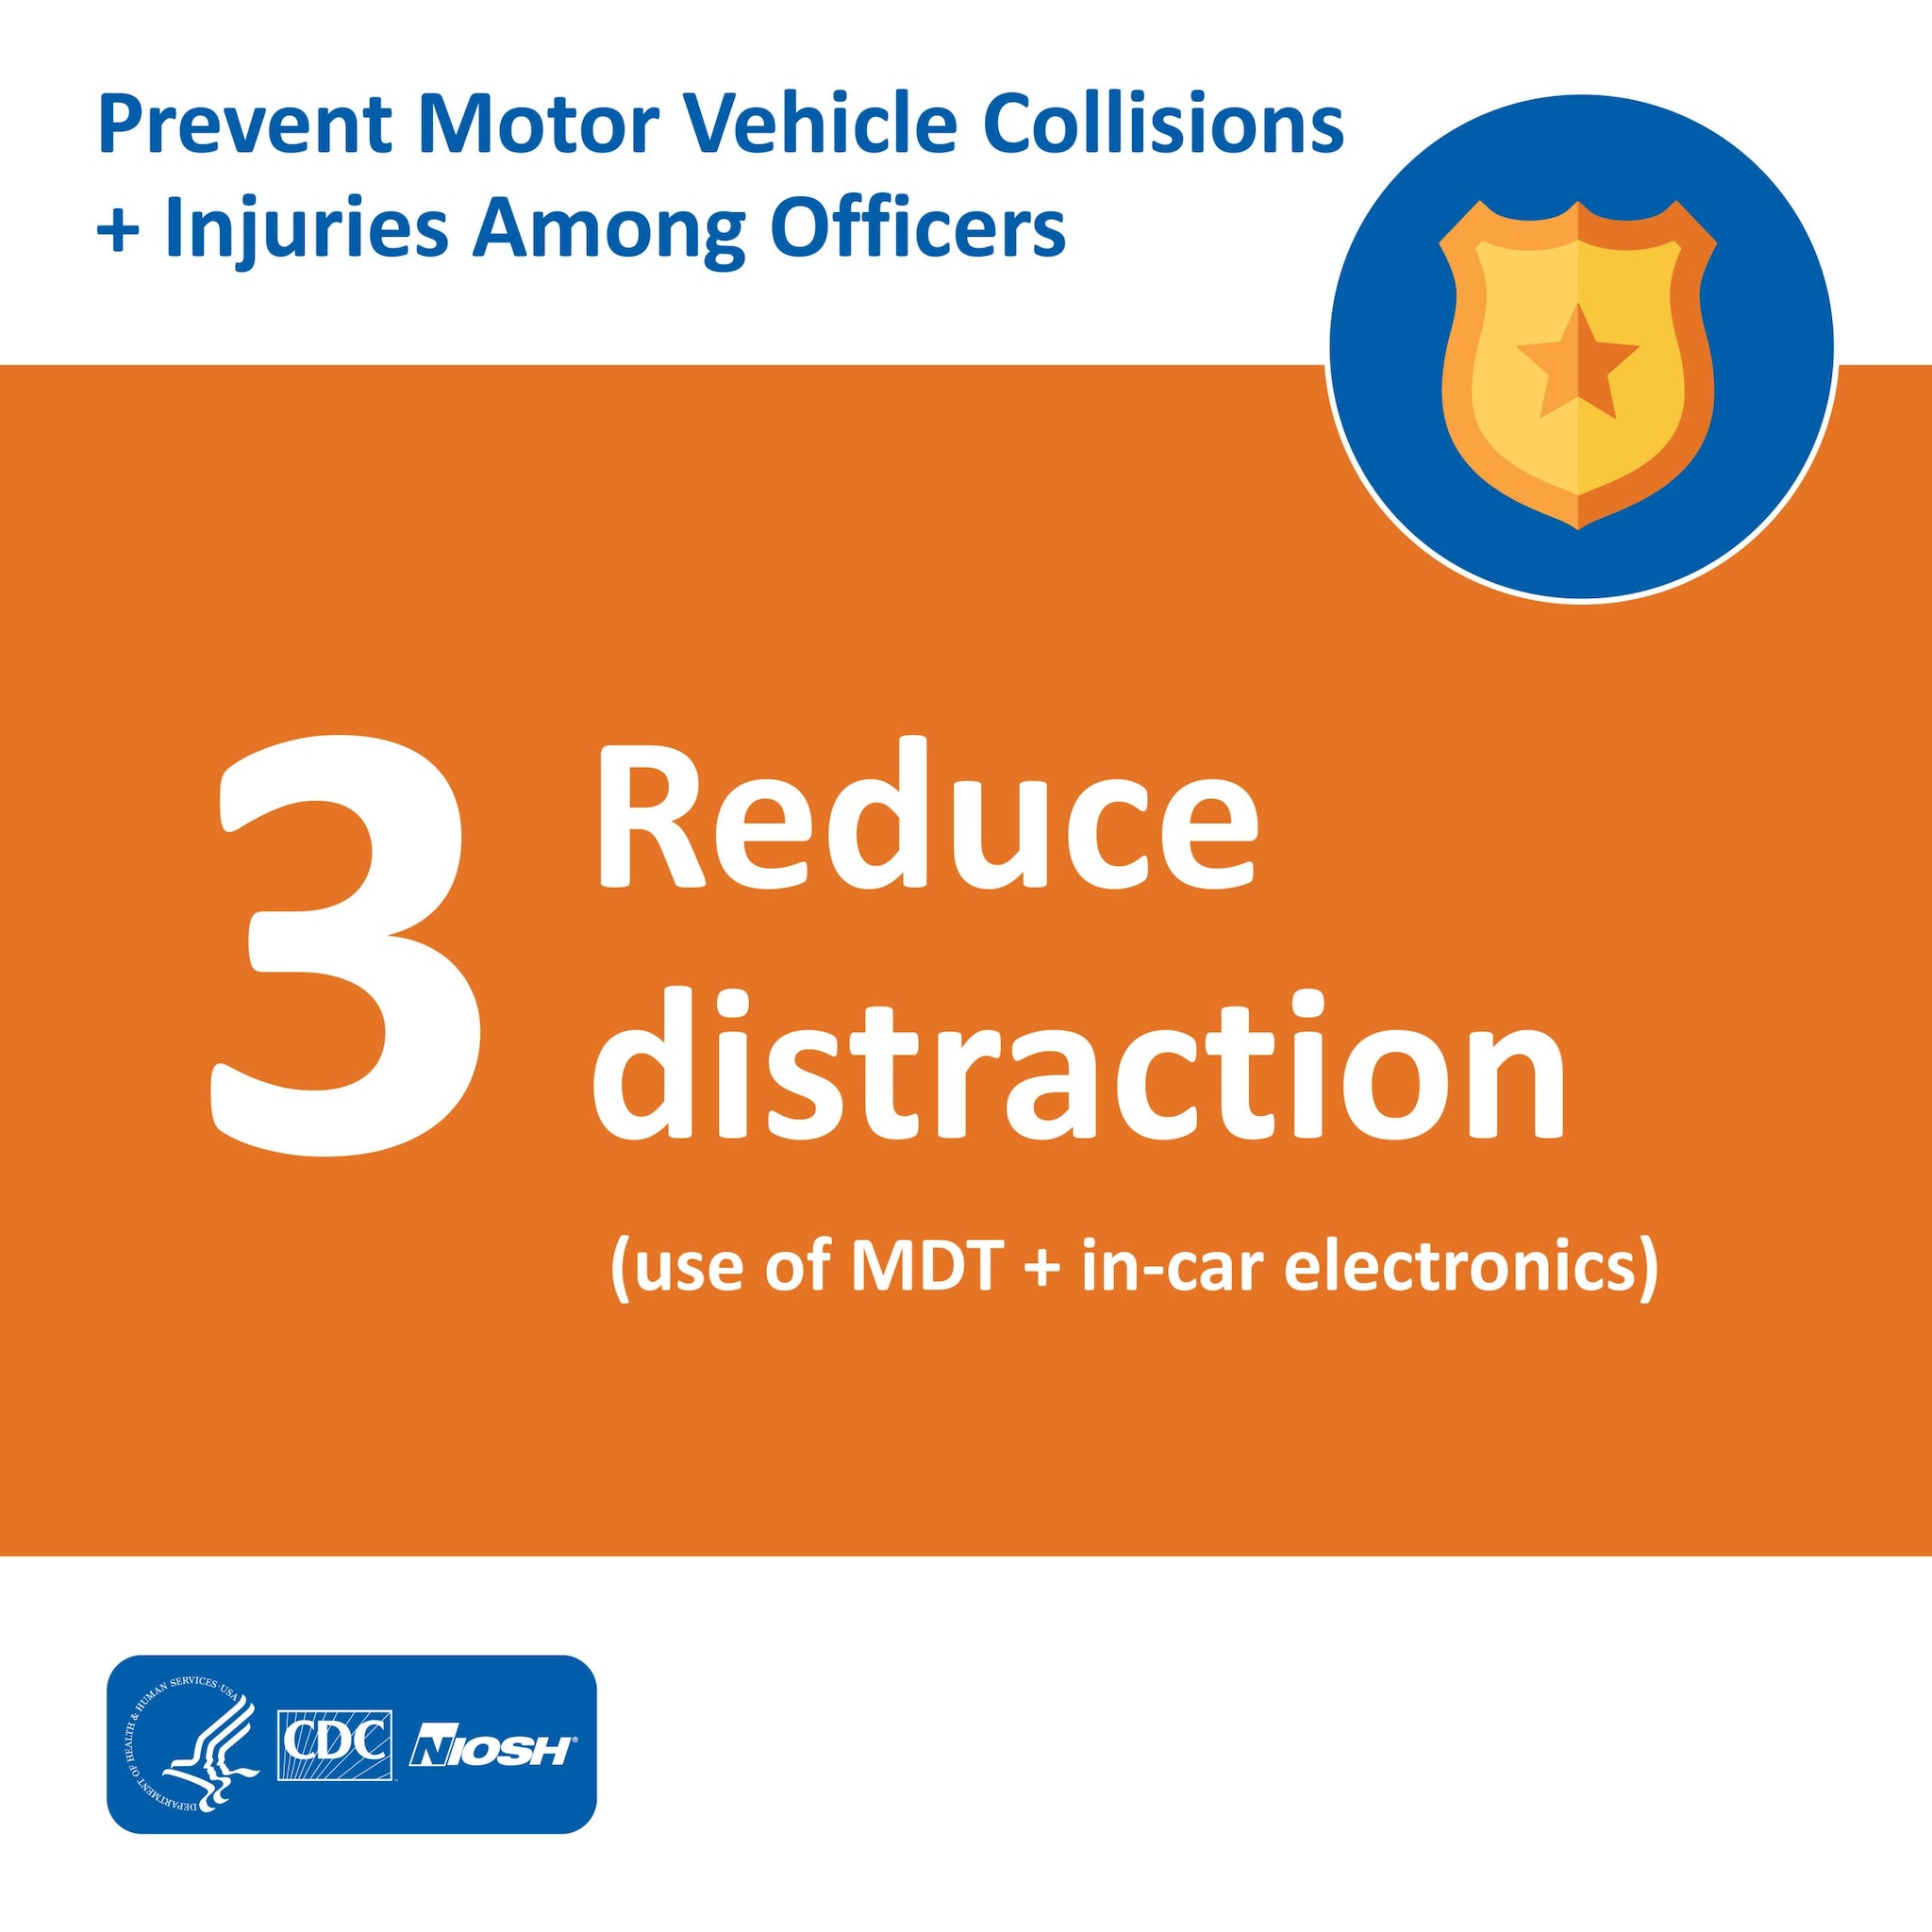 Prevent Motor Vehicle Collisions + Injuries Among Officers: 3 Reduce distraction (use of MDT + in-car electronics)